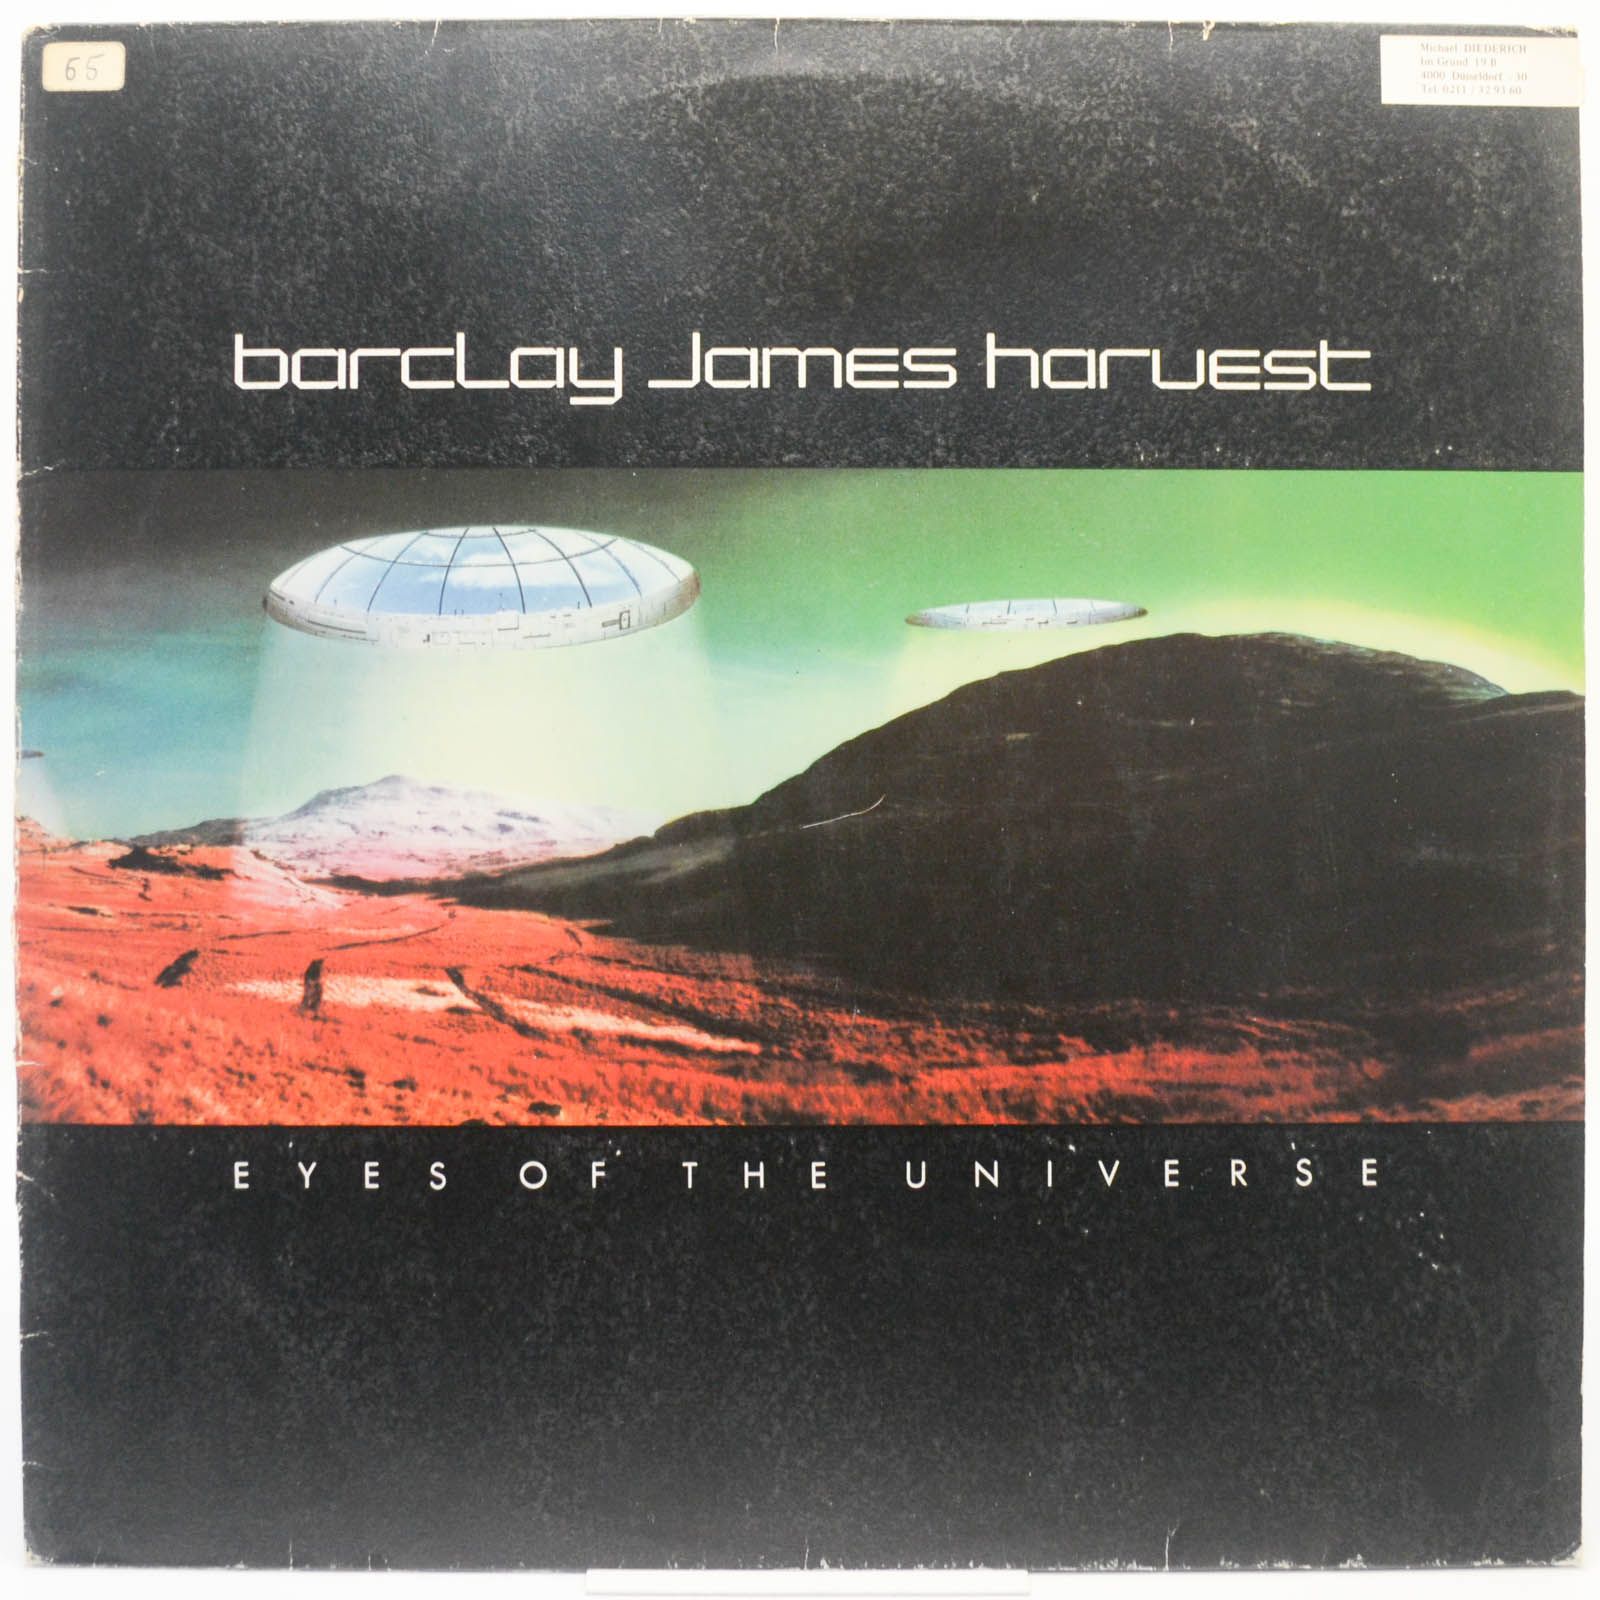 Barclay James Harvest — Eyes Of The Universe, 1979